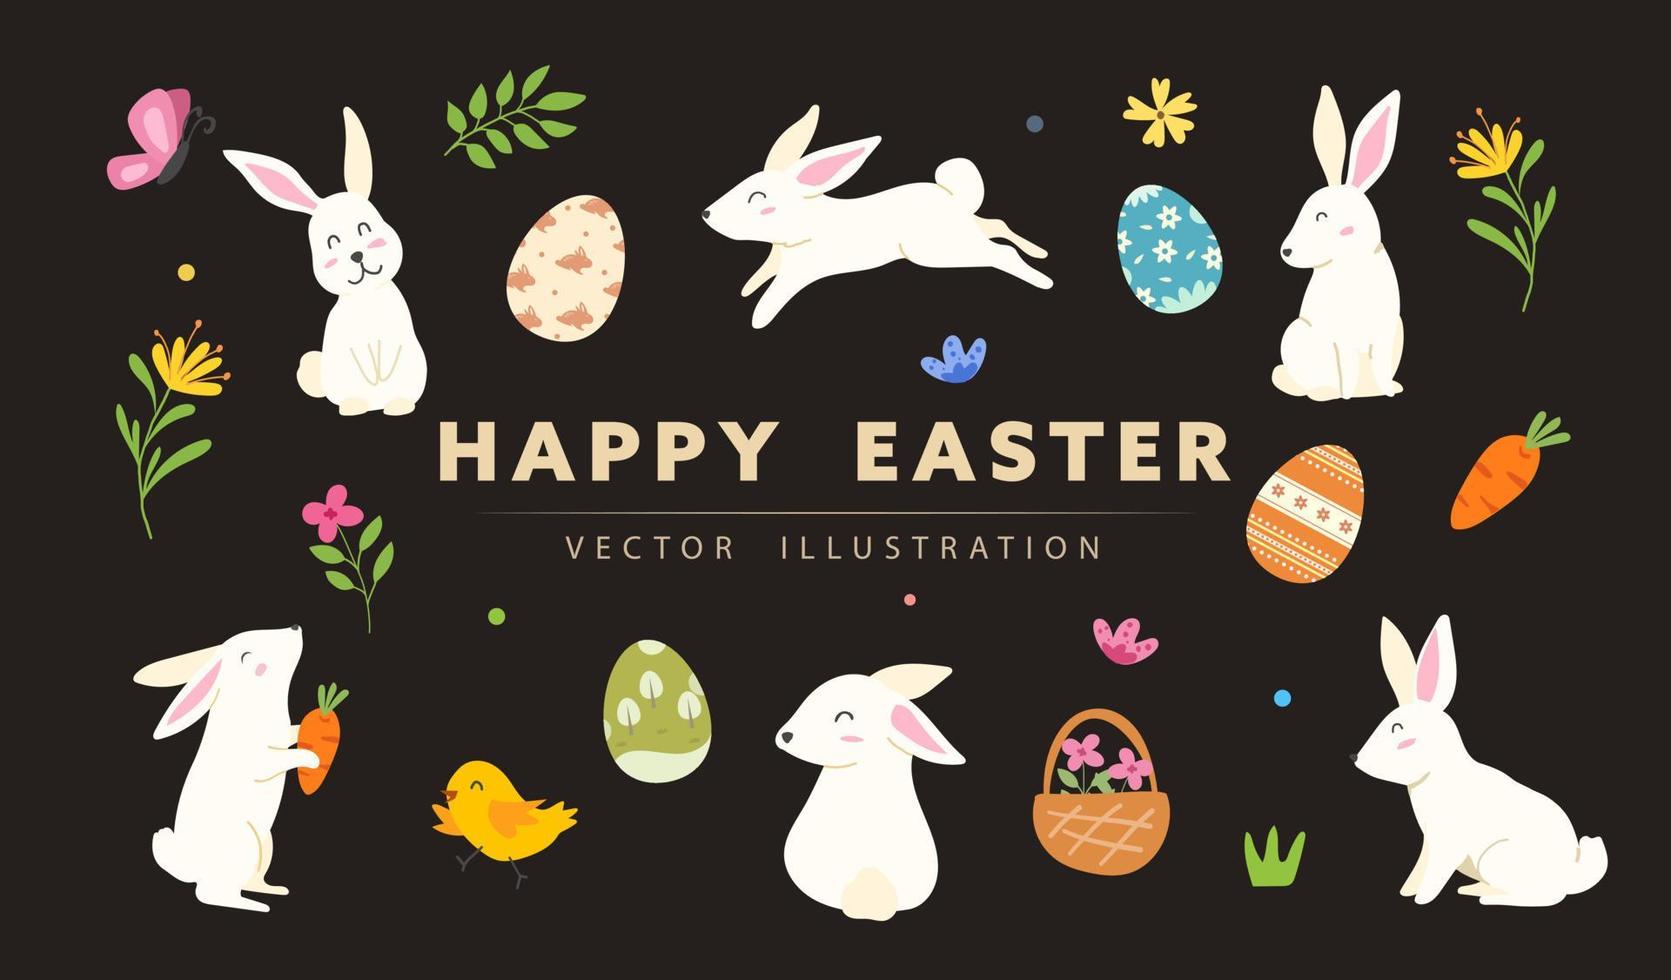 Hand drawn collection of cute bunny for easter and spring with flowers, leaves and decorative elements. Vector illustration